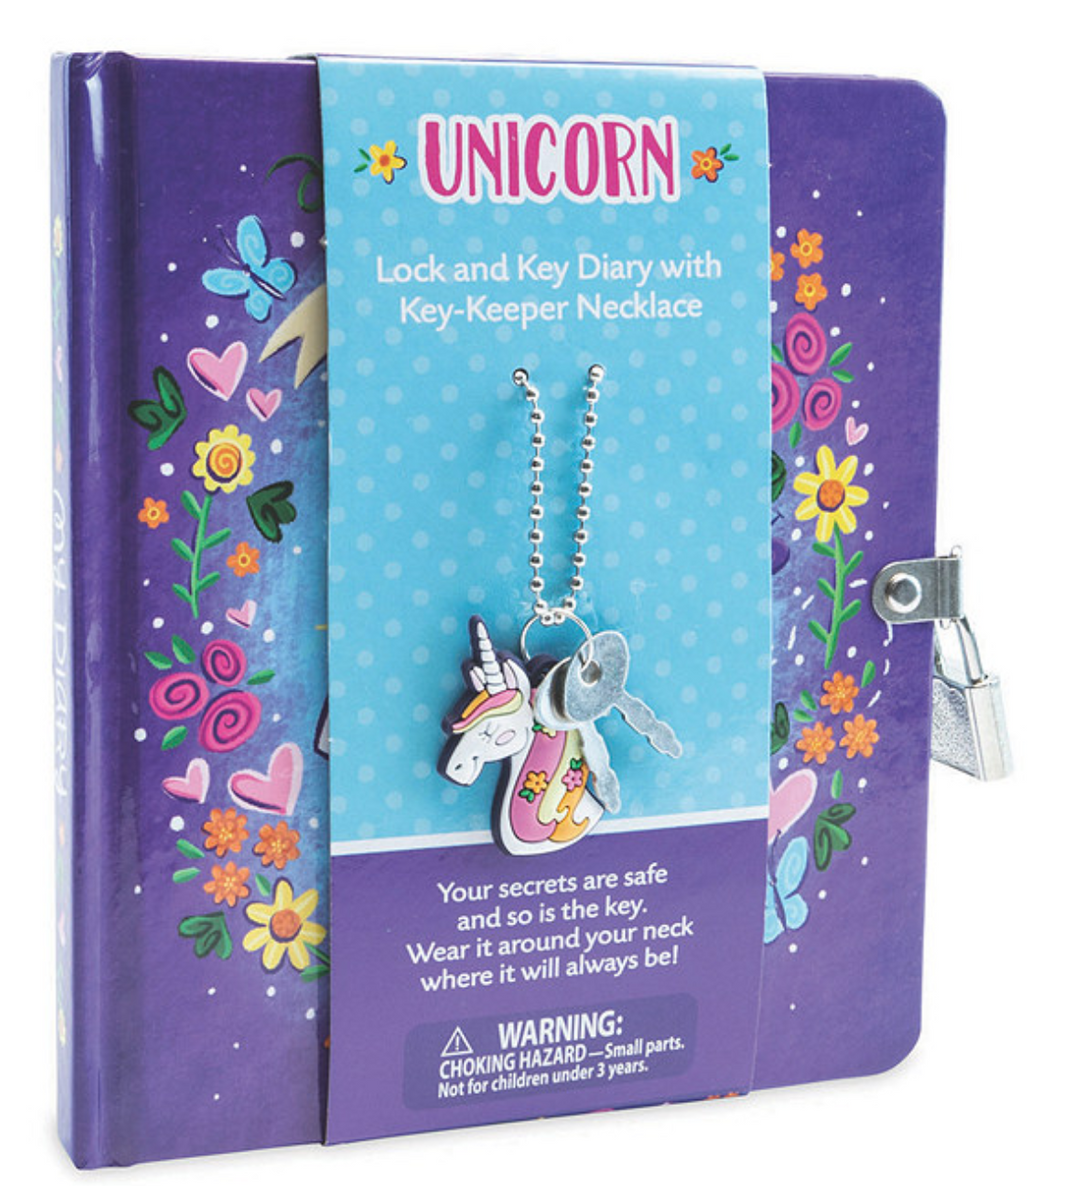 Unicorn Diary and Necklace